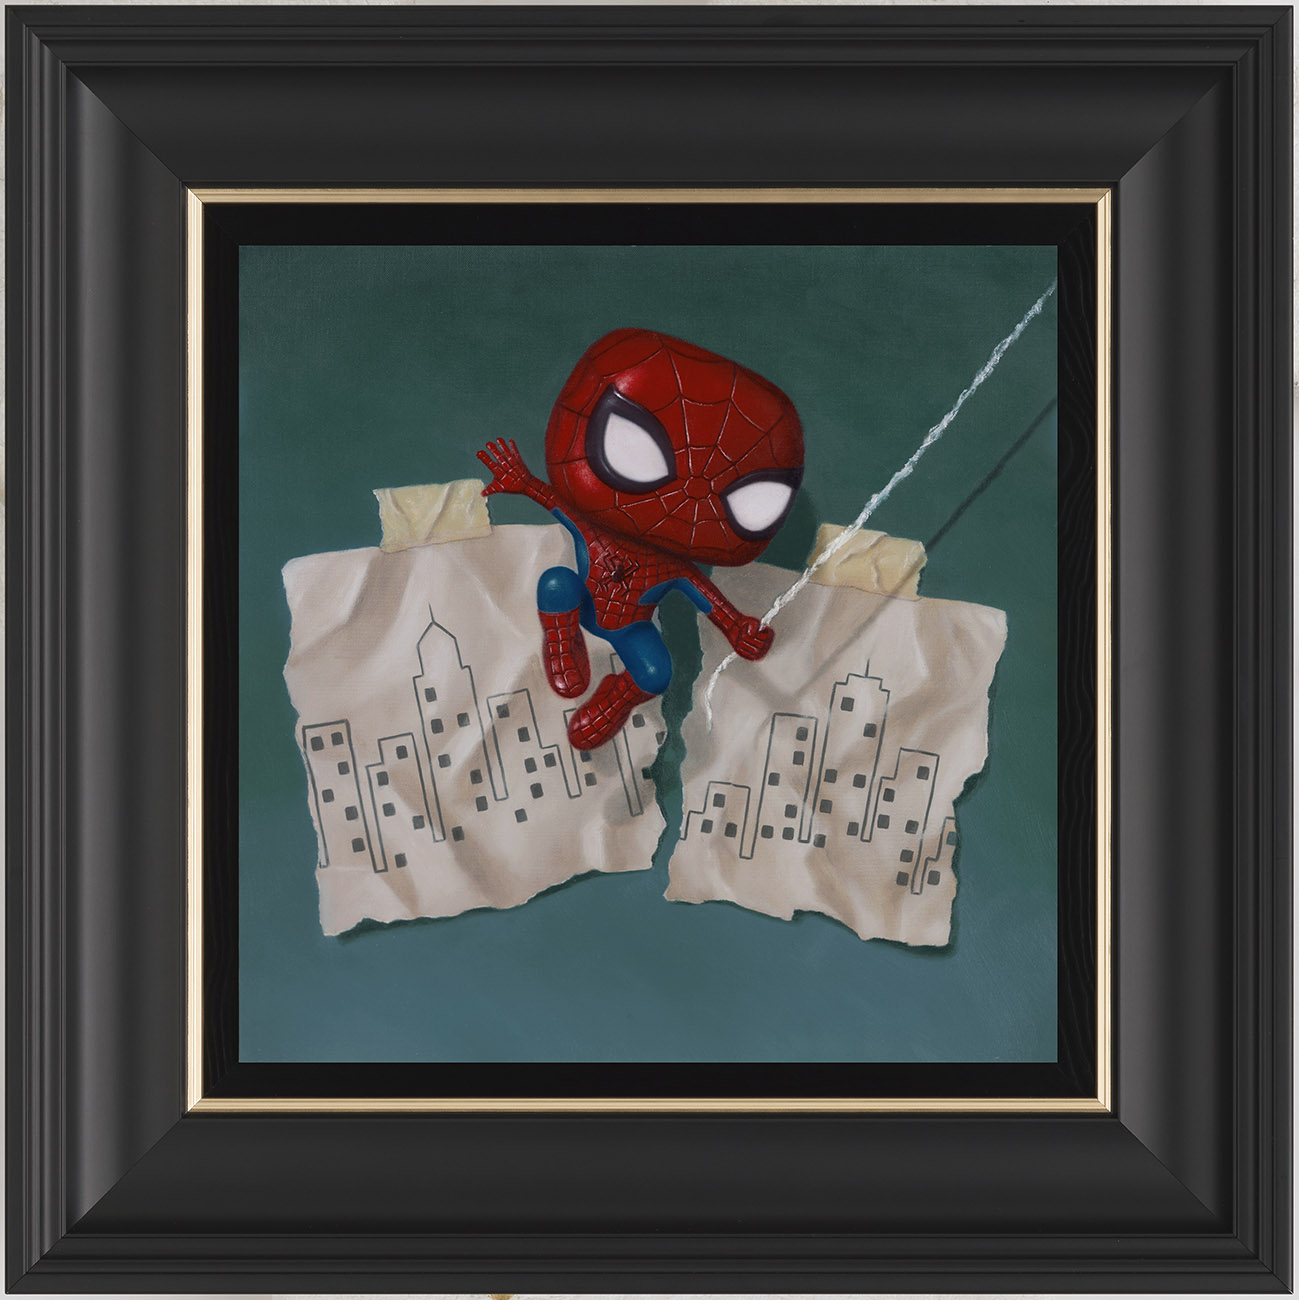 Swing into Action by Nigel Humphries, Spiderman